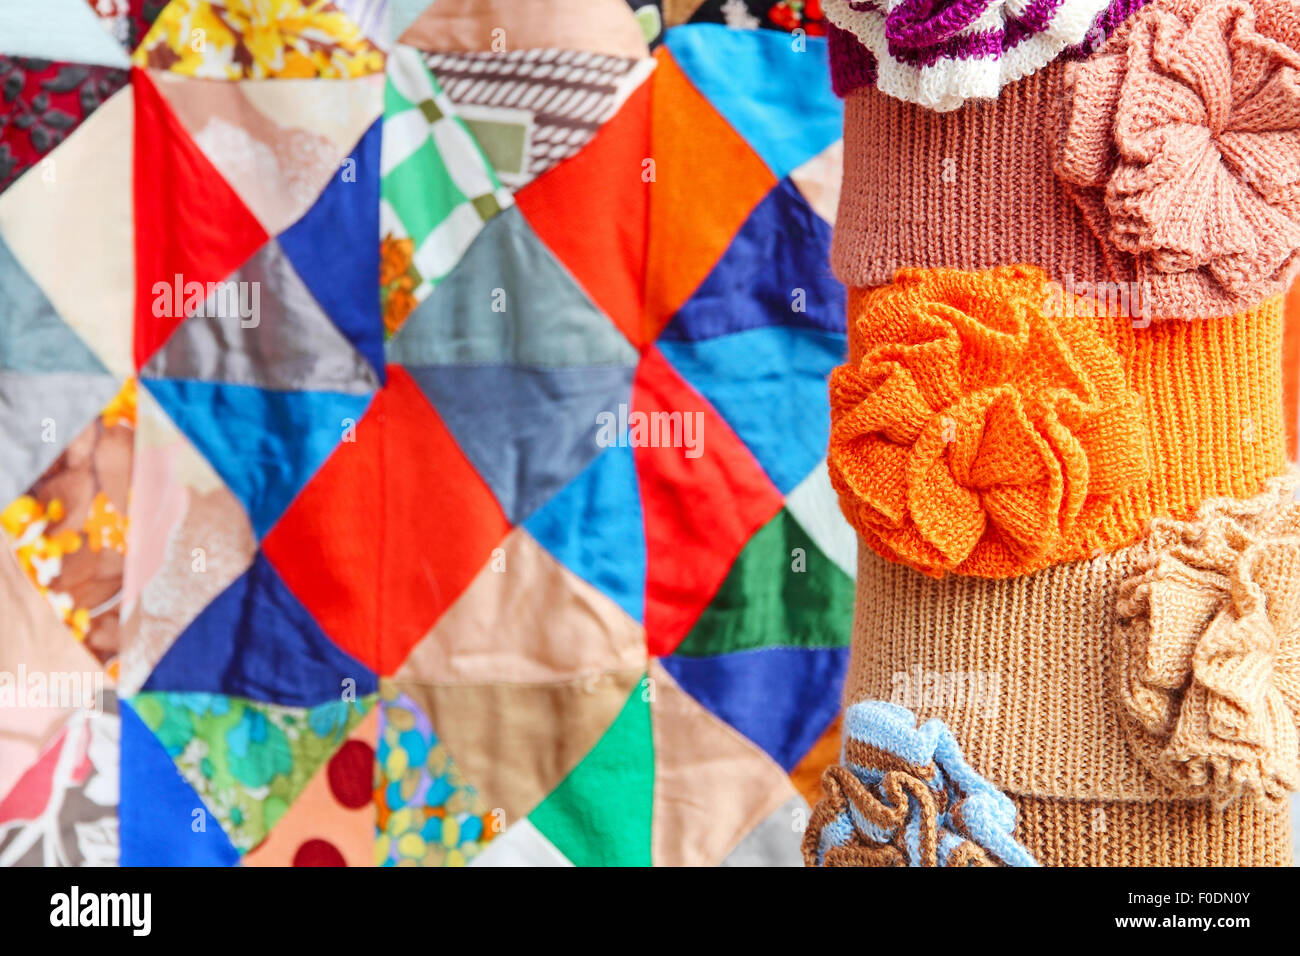 Multicolored clothing accessory on colorful patchwork quilt abstract background. Stock Photo